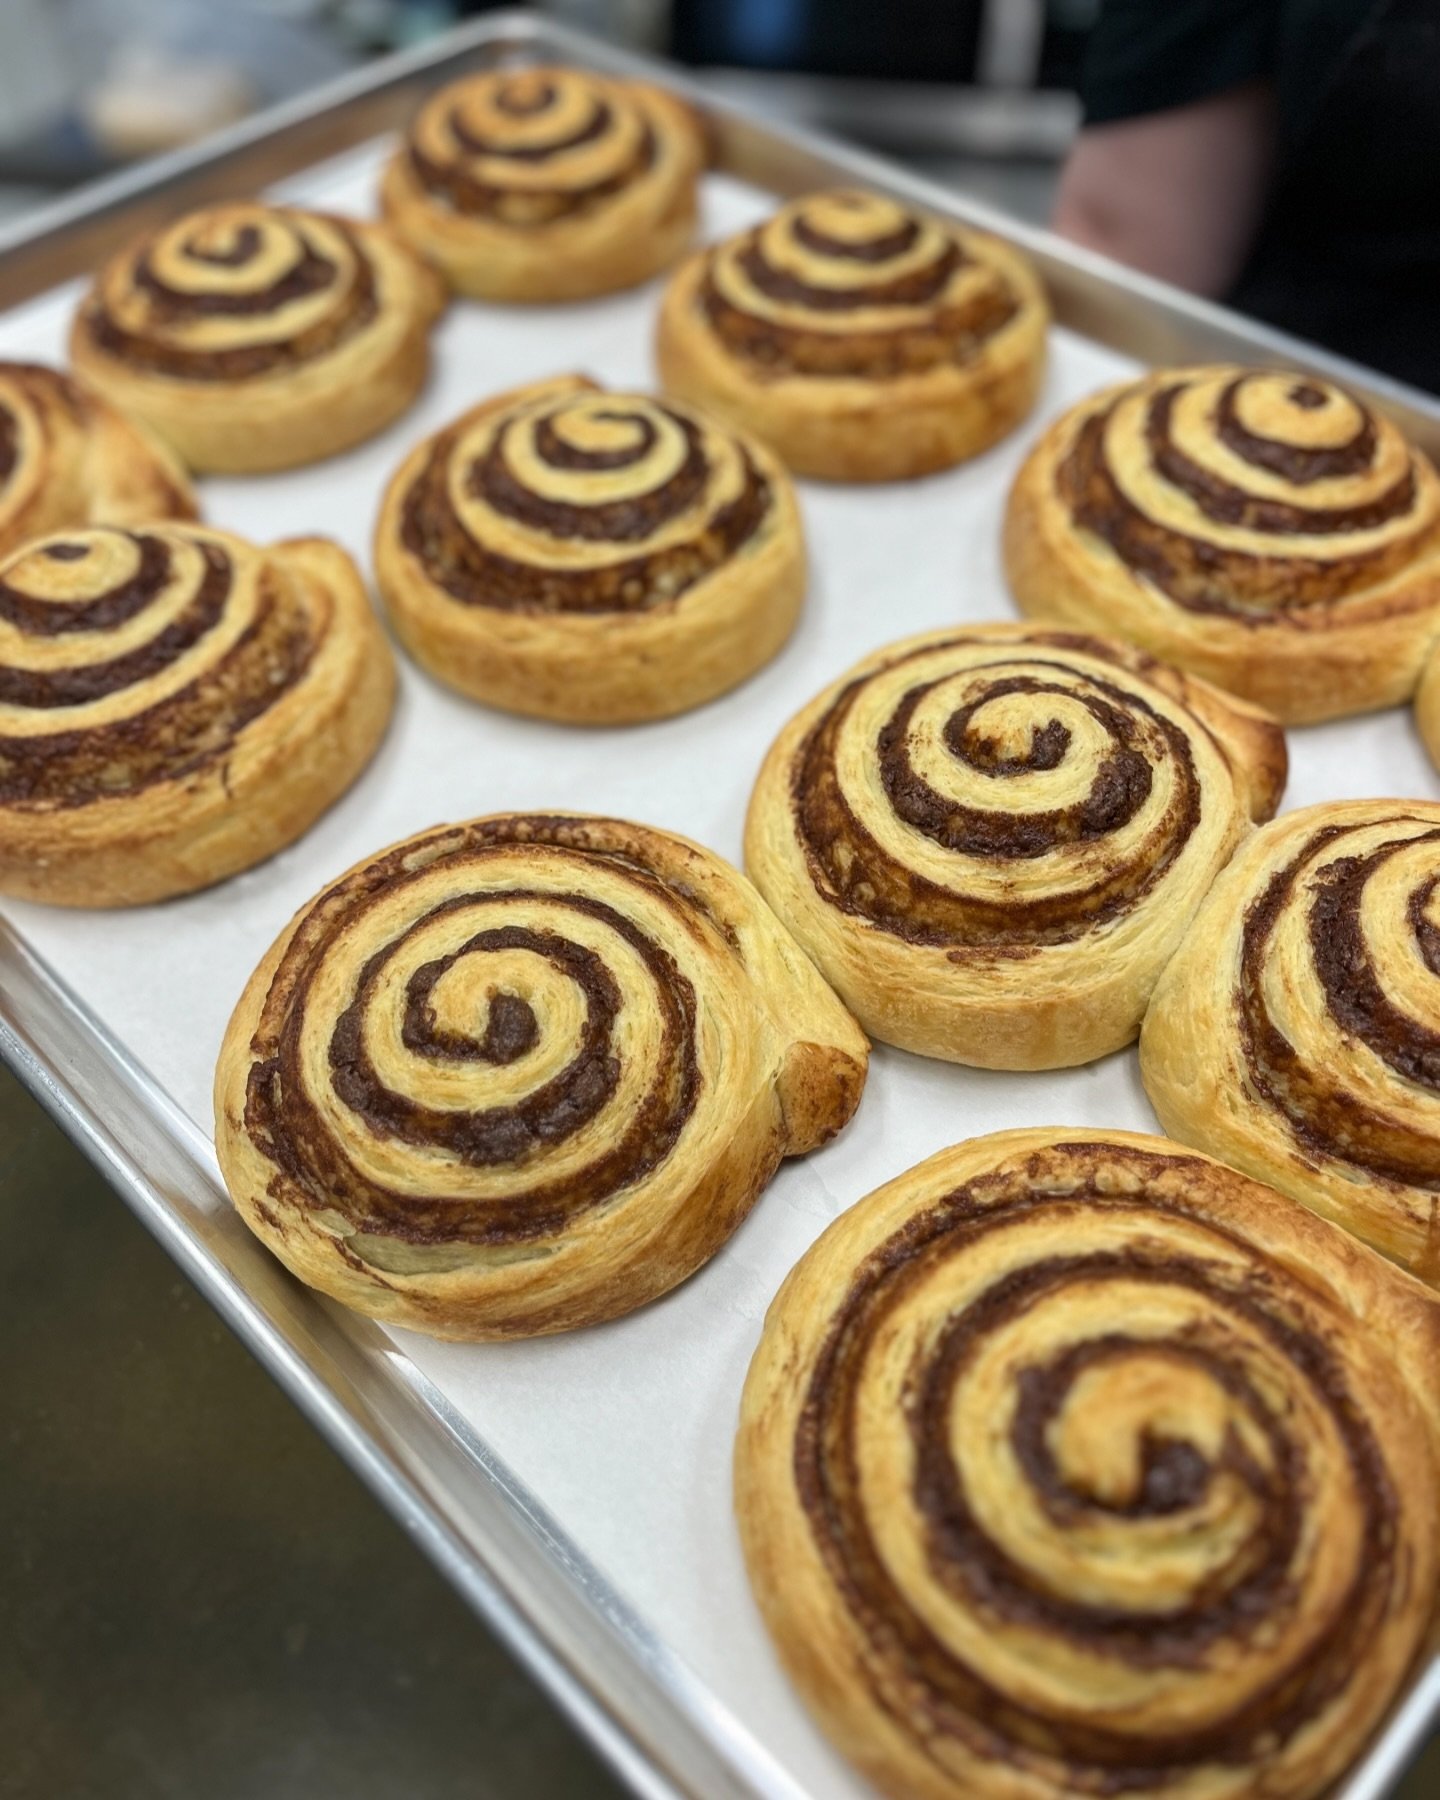 Happy ☀️day everyone!!! 

Snag some cinnamon rolls while they&rsquo;re still HOT! ♨️

We&rsquo;re open today until 1pm, See you soon! 

📍34161 Center Ridge Road, North Ridgeville